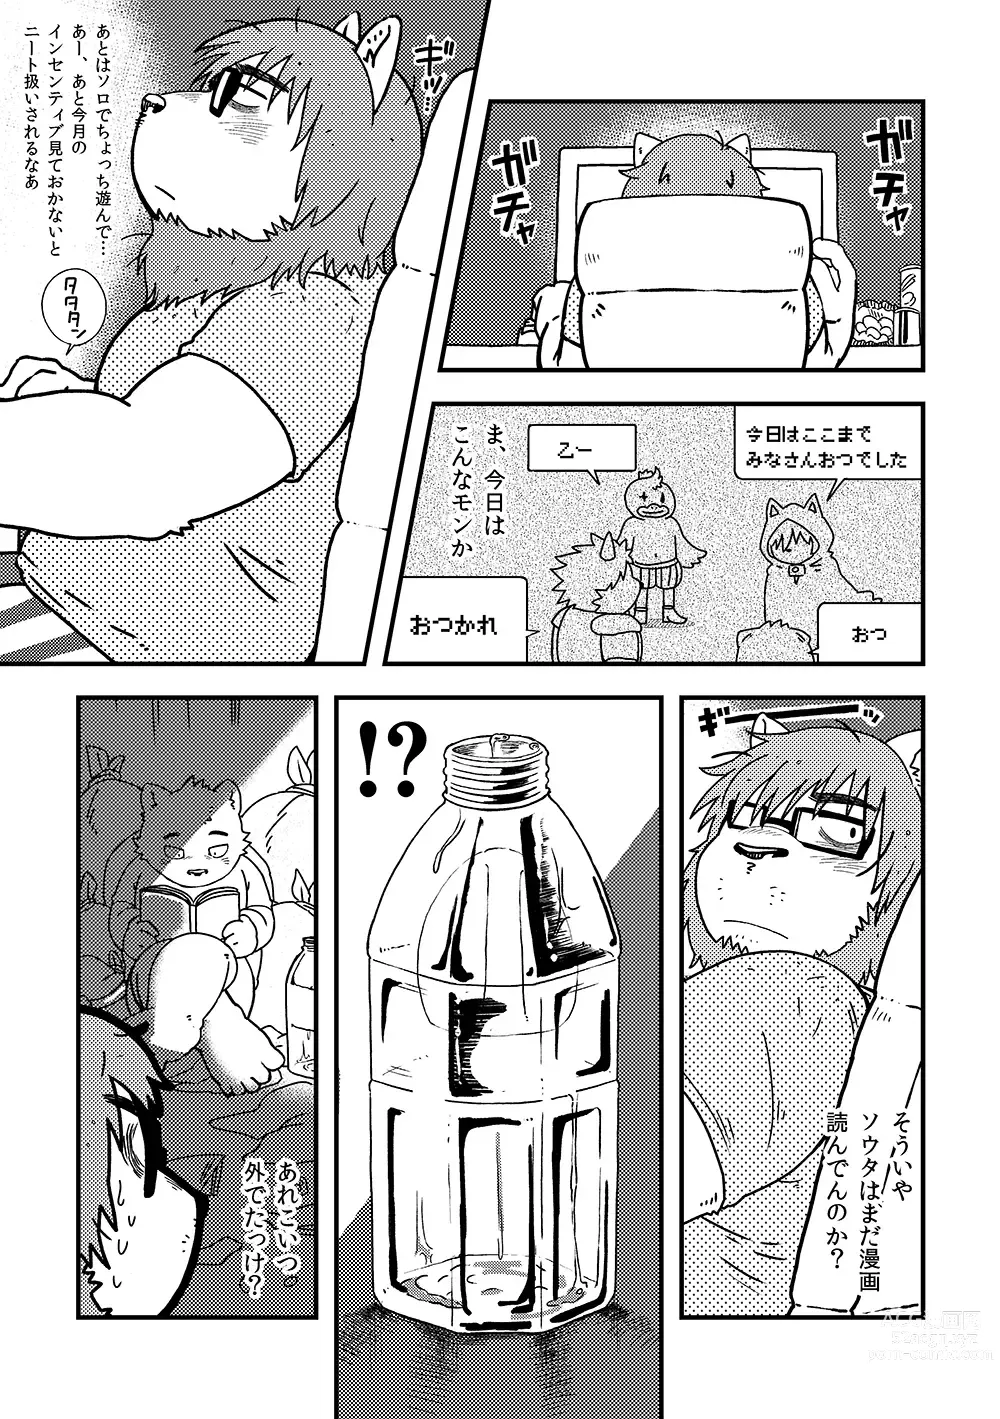 Page 6 of doujinshi Bottles Brothers